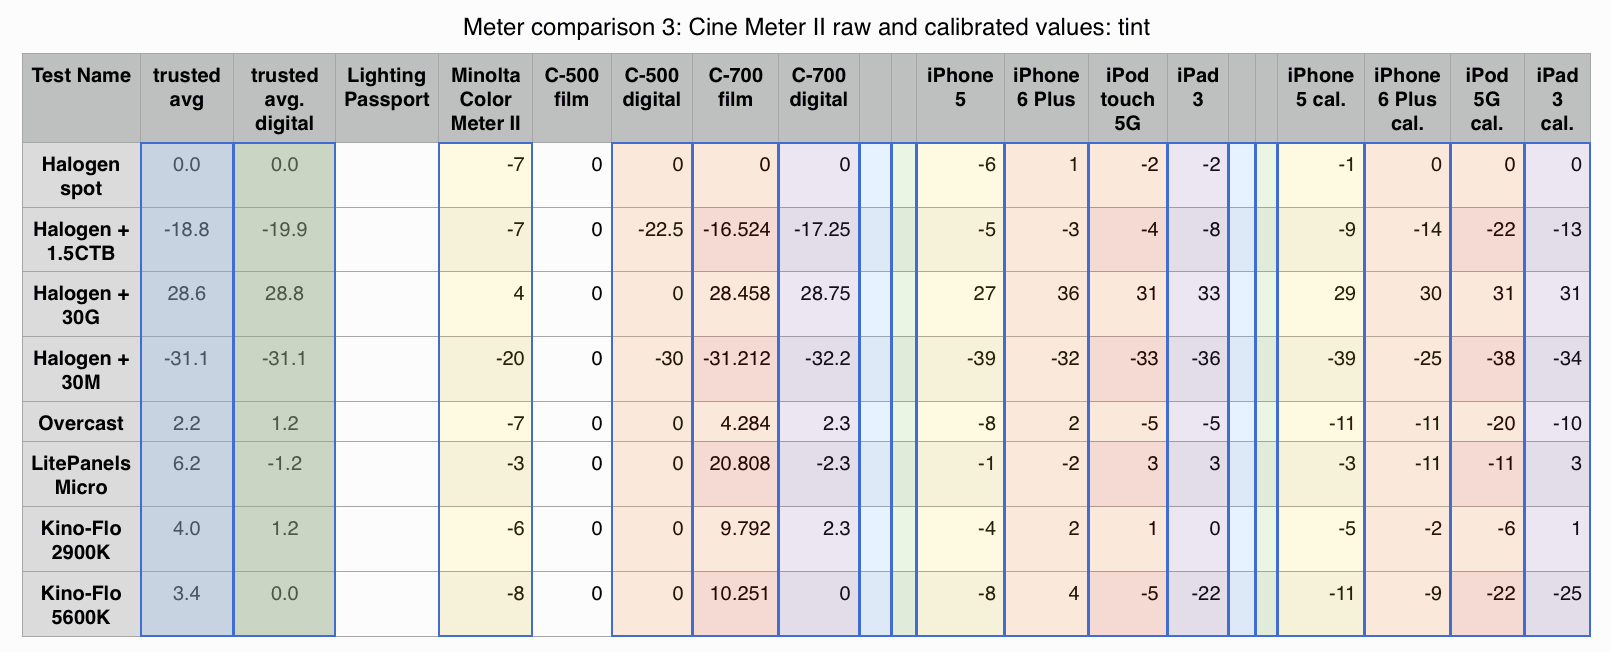 Table of test results, Cine Meter II vs other meters, tint values, test #3